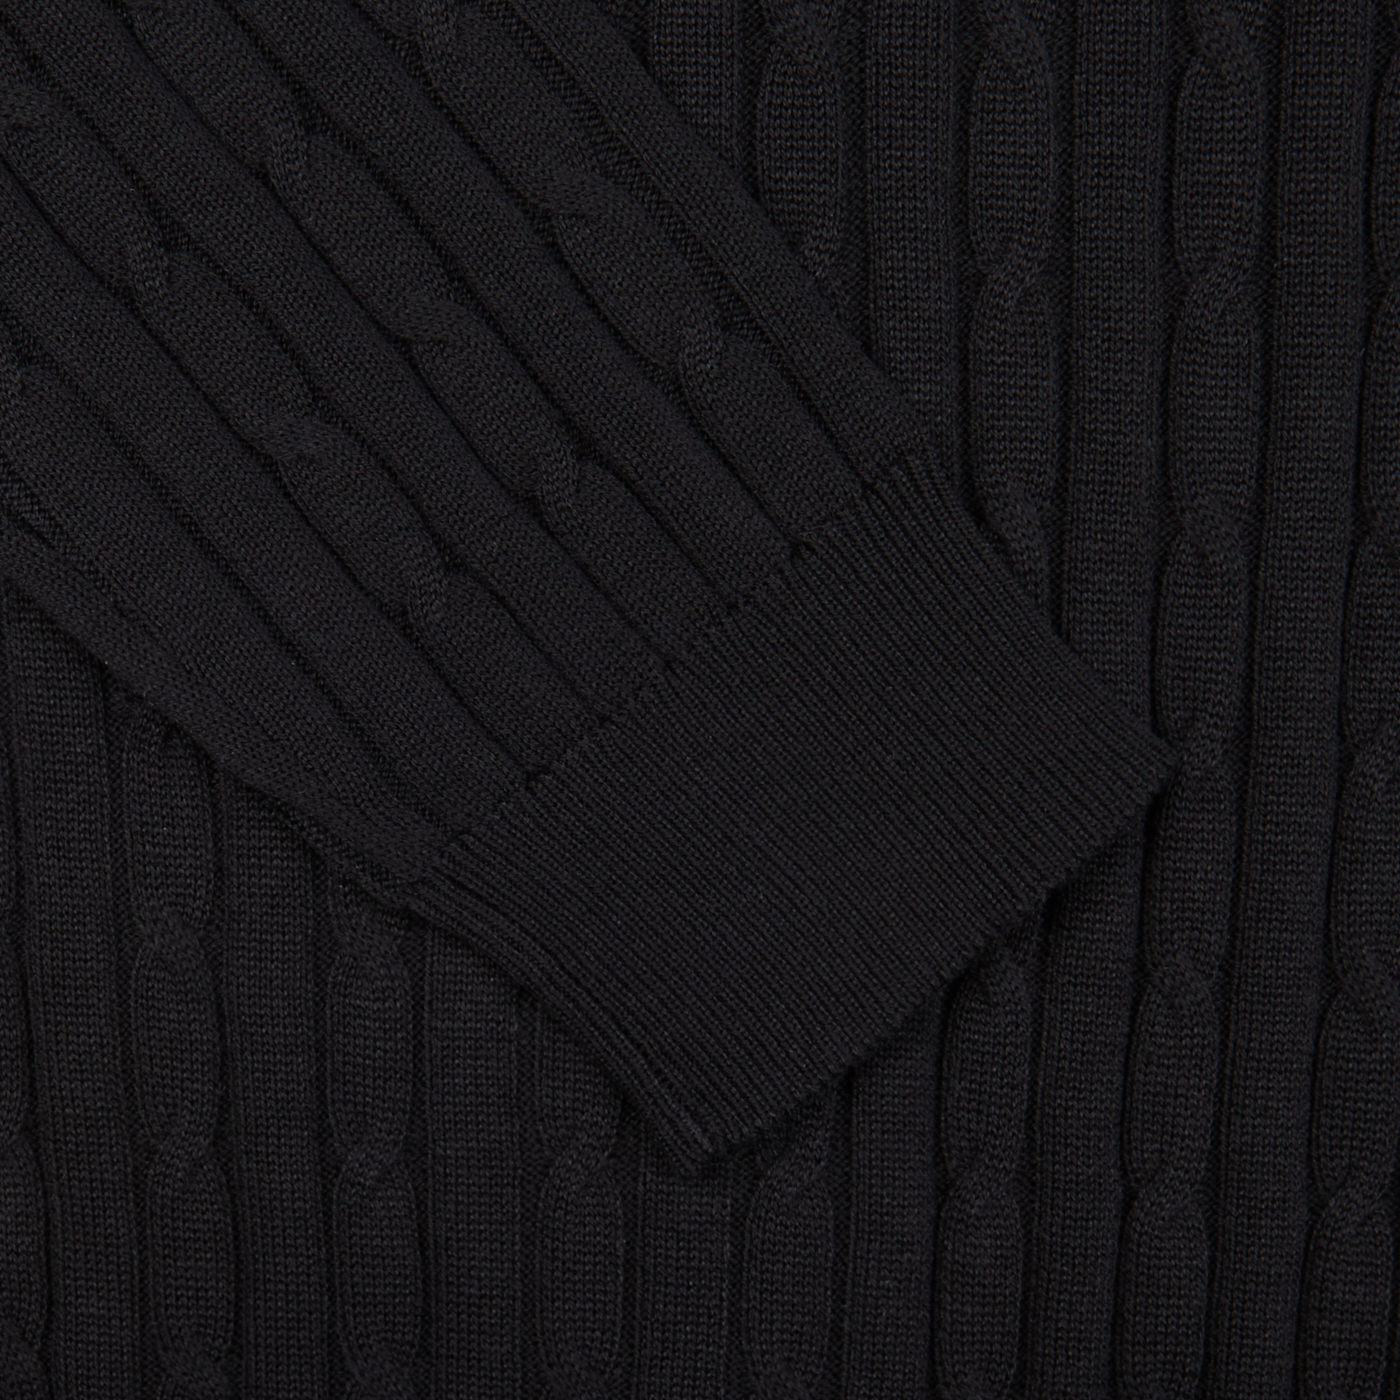 Close-up of a black Maurizio Baldassari Black Cotton Silk Cable-Knit 1/4 Zip Sweater with ribbed cuffs.